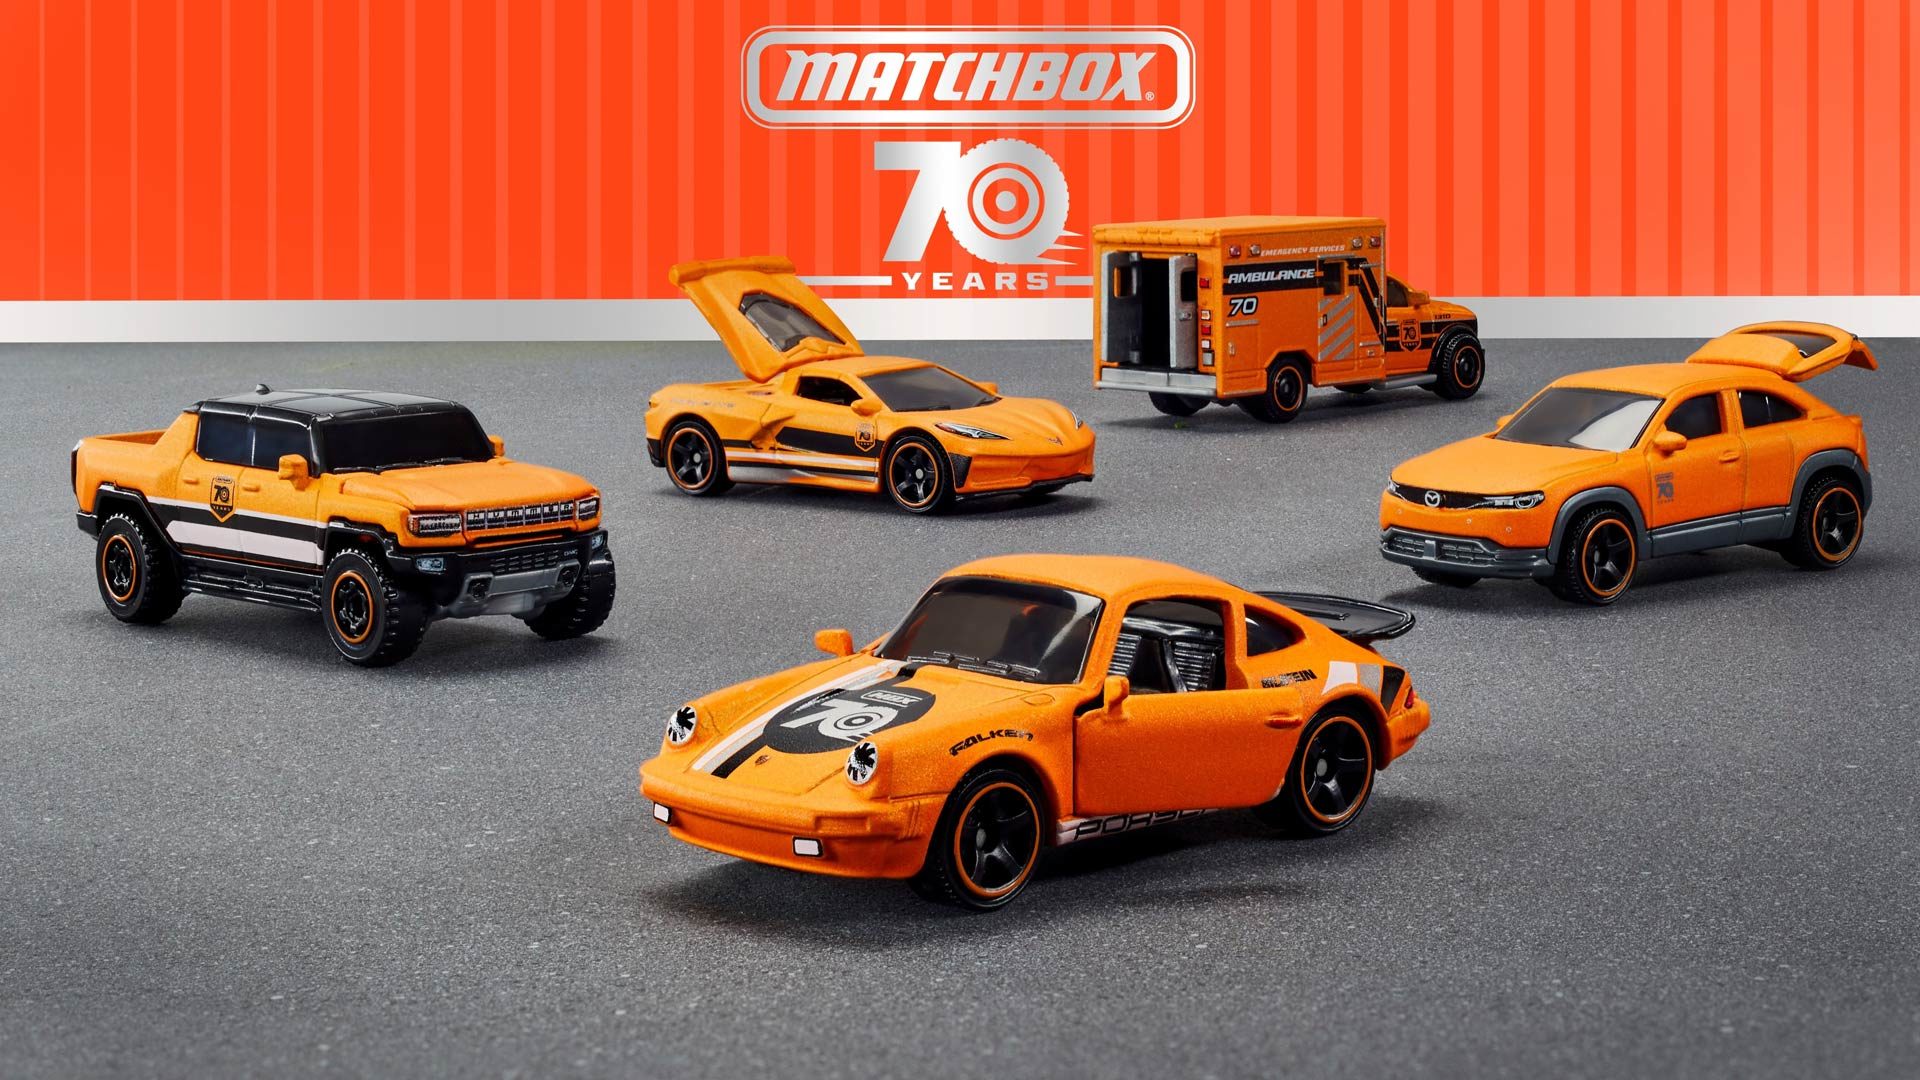 Matchbox to celebrate 70th anniversary with limited edition models